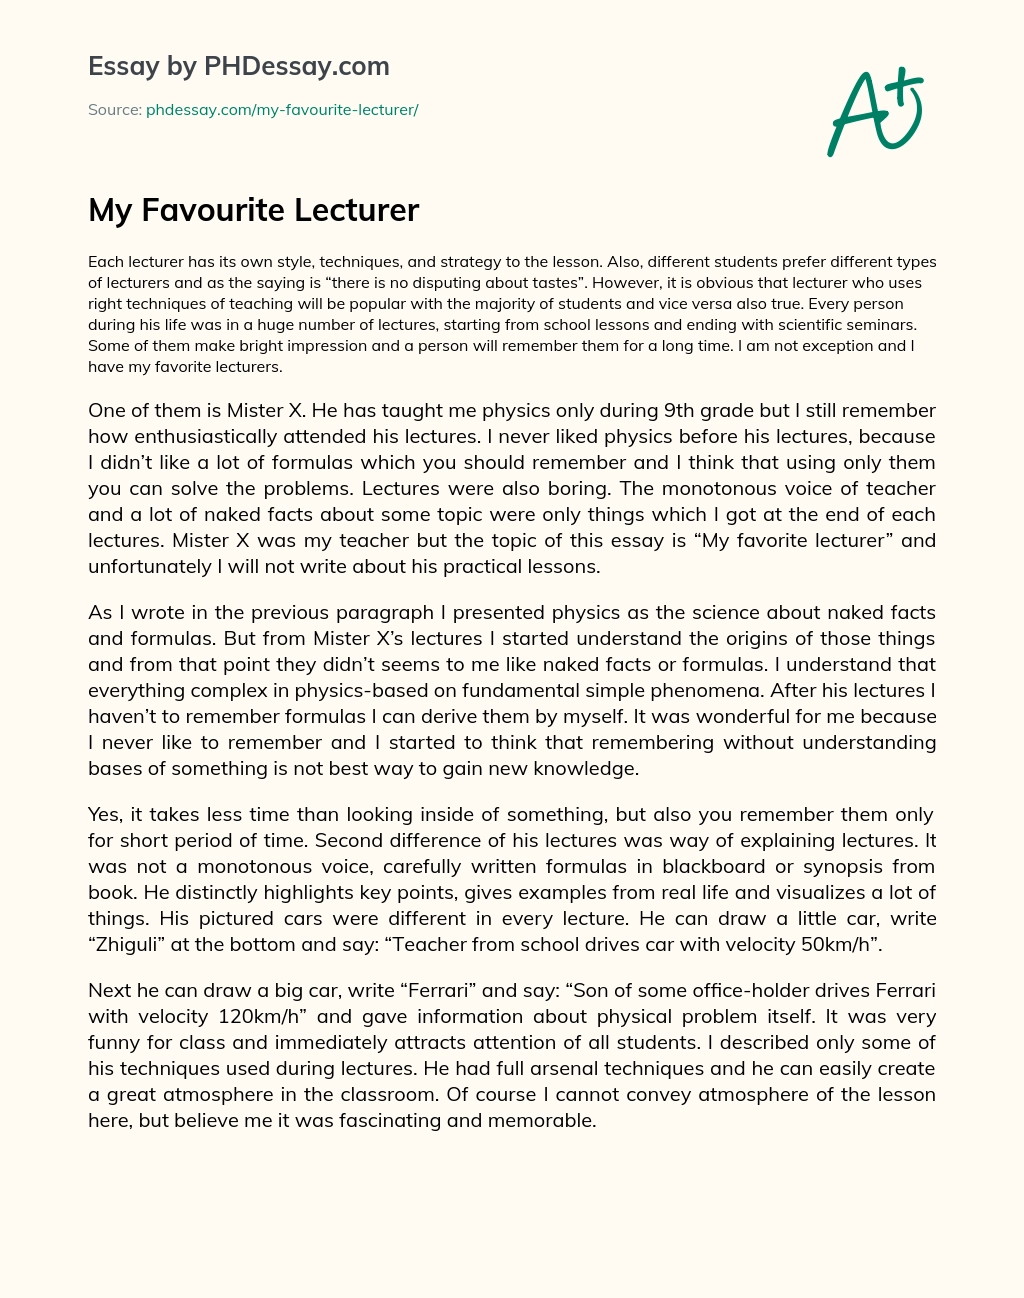 My Favourite Lecturer essay